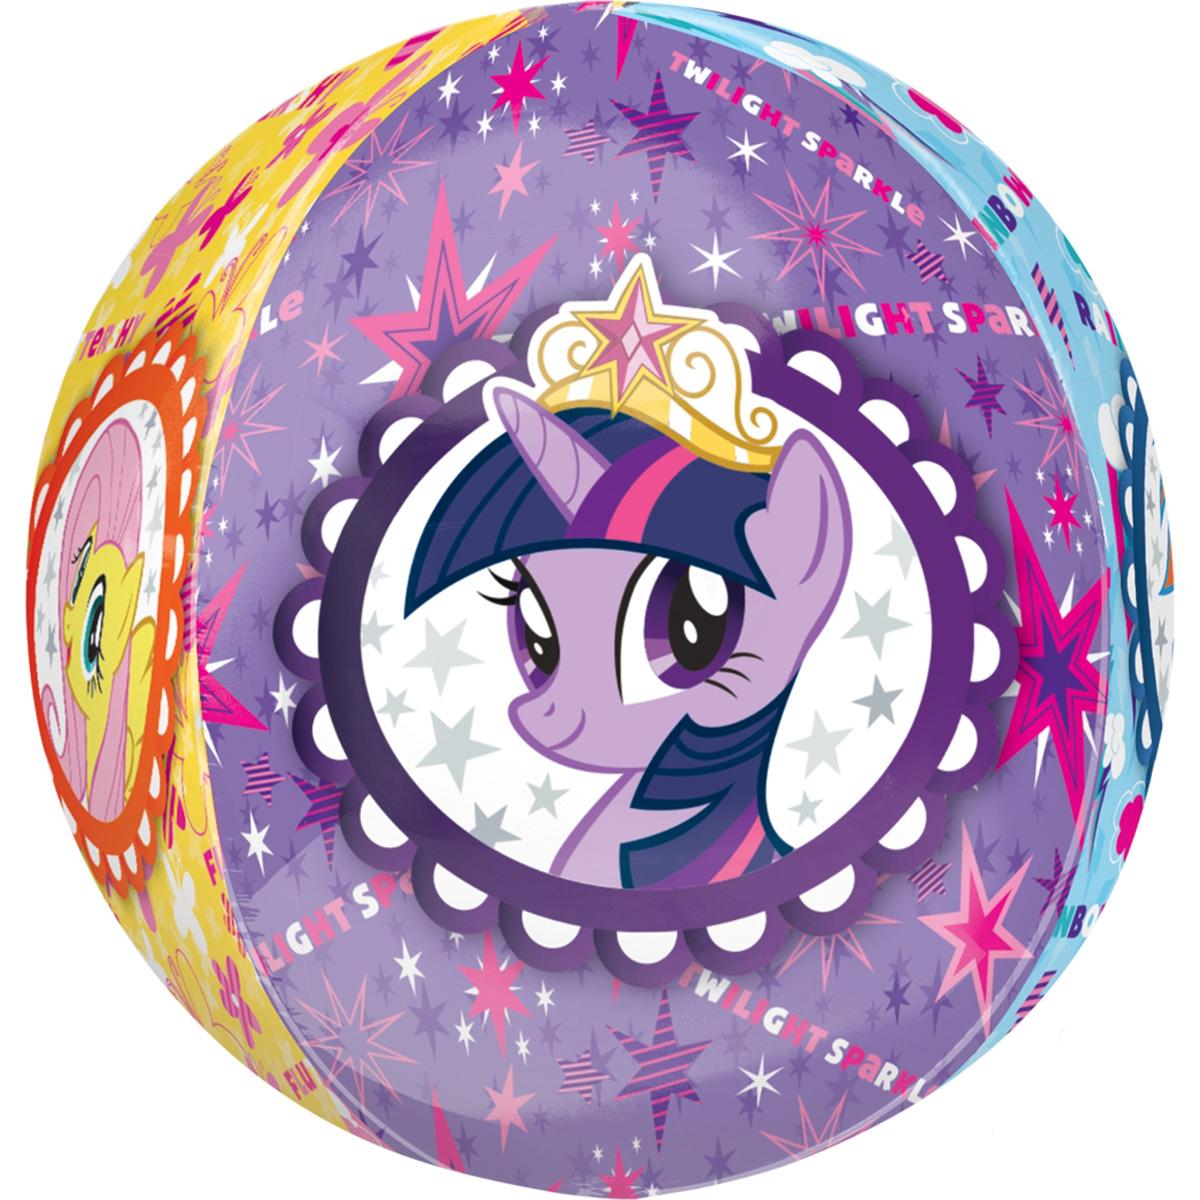 My Little Pony Orbz Balloon 38x40cm Balloons & Streamers - Party Centre - Party Centre